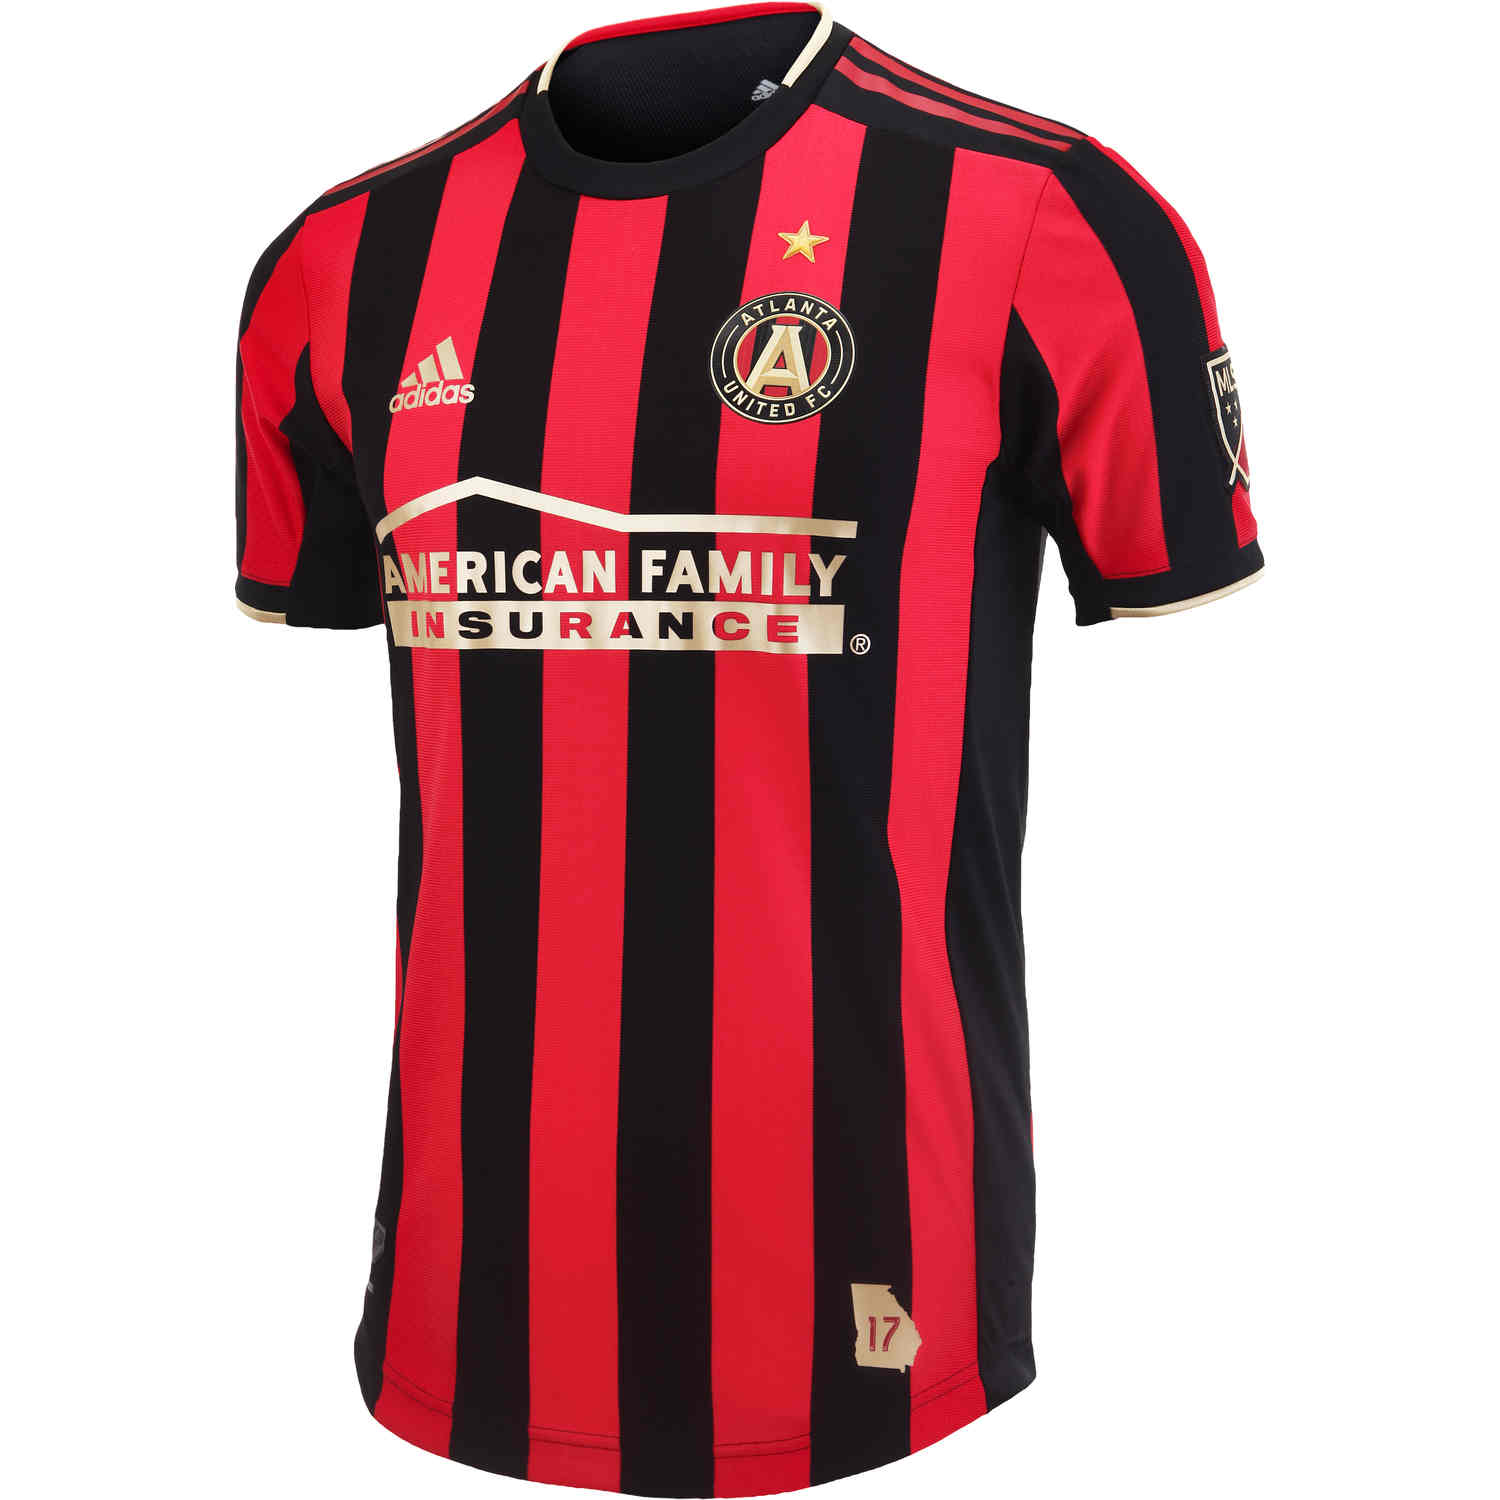 adidas 2021 MLS All-Star Game Authentic Jersey - Black